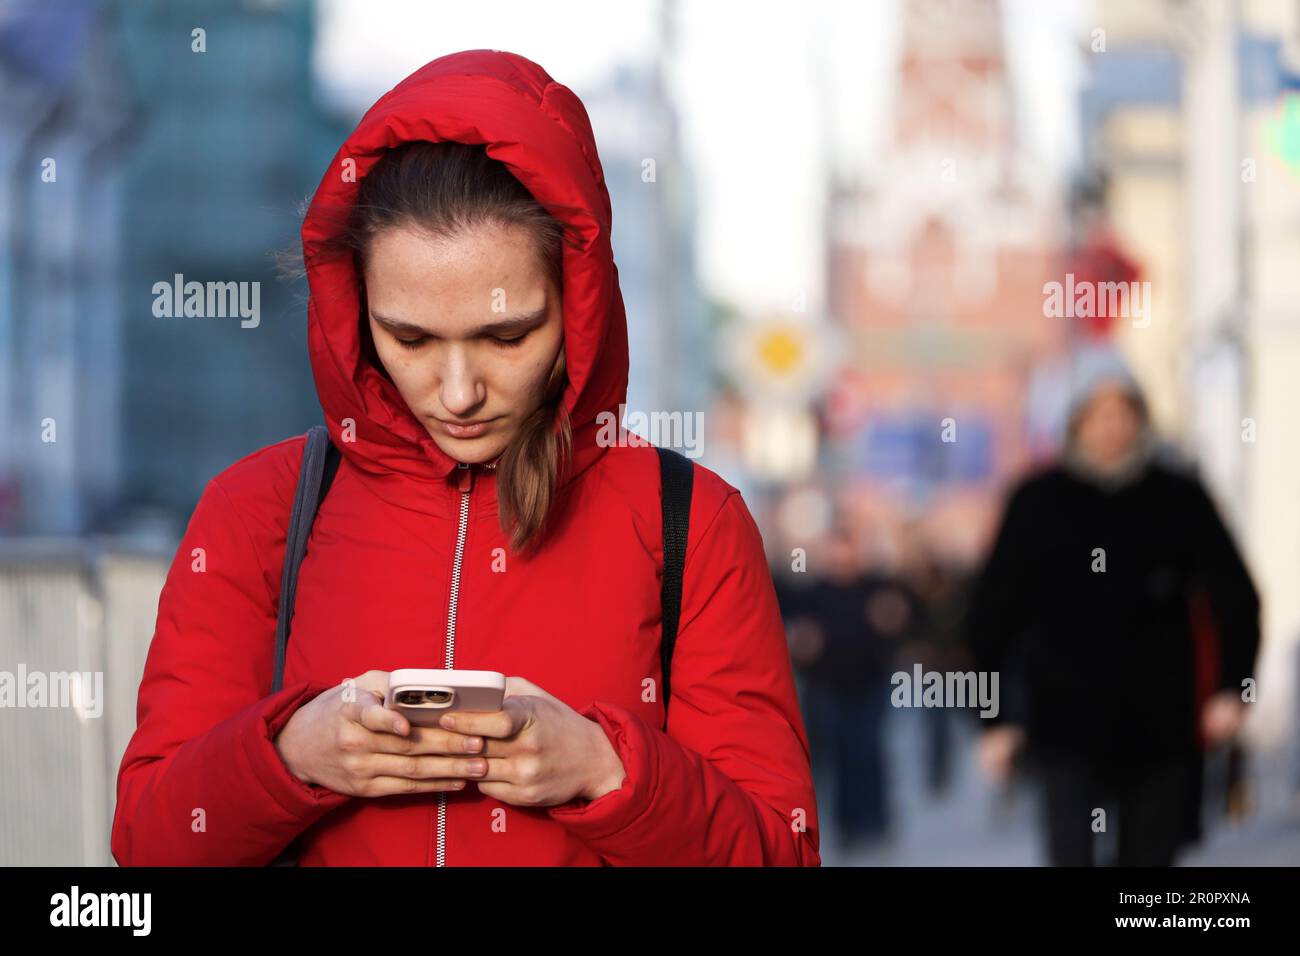 Girl in red coat walking down a street with smartphone. Using mobile phone in spring city Stock Photo